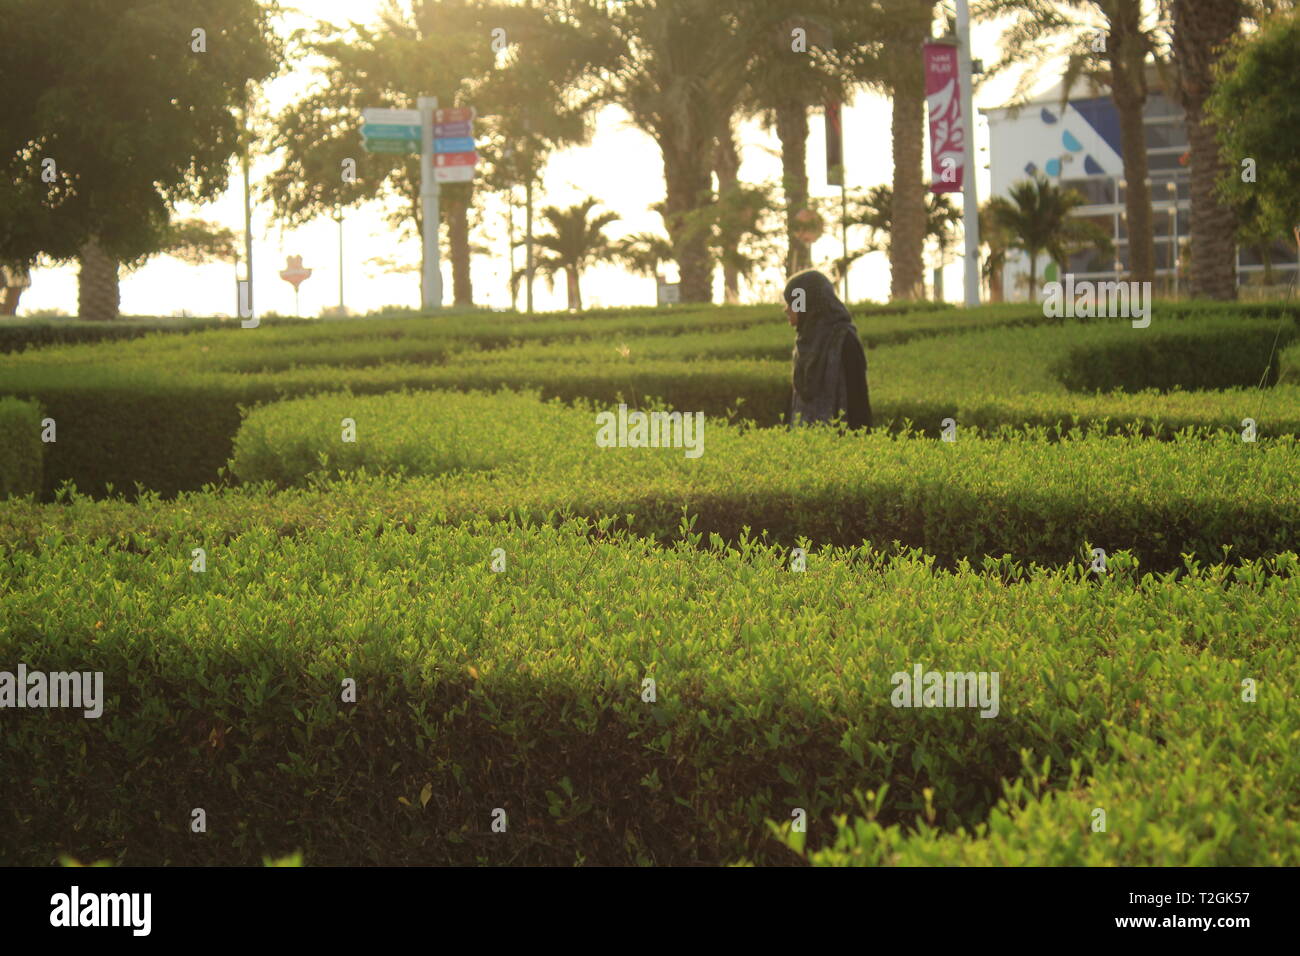 A woman walking through a modern green beautiful Bush Maze full of greenery, nature, trees, sign and glass building with sunshine. Stock Photo